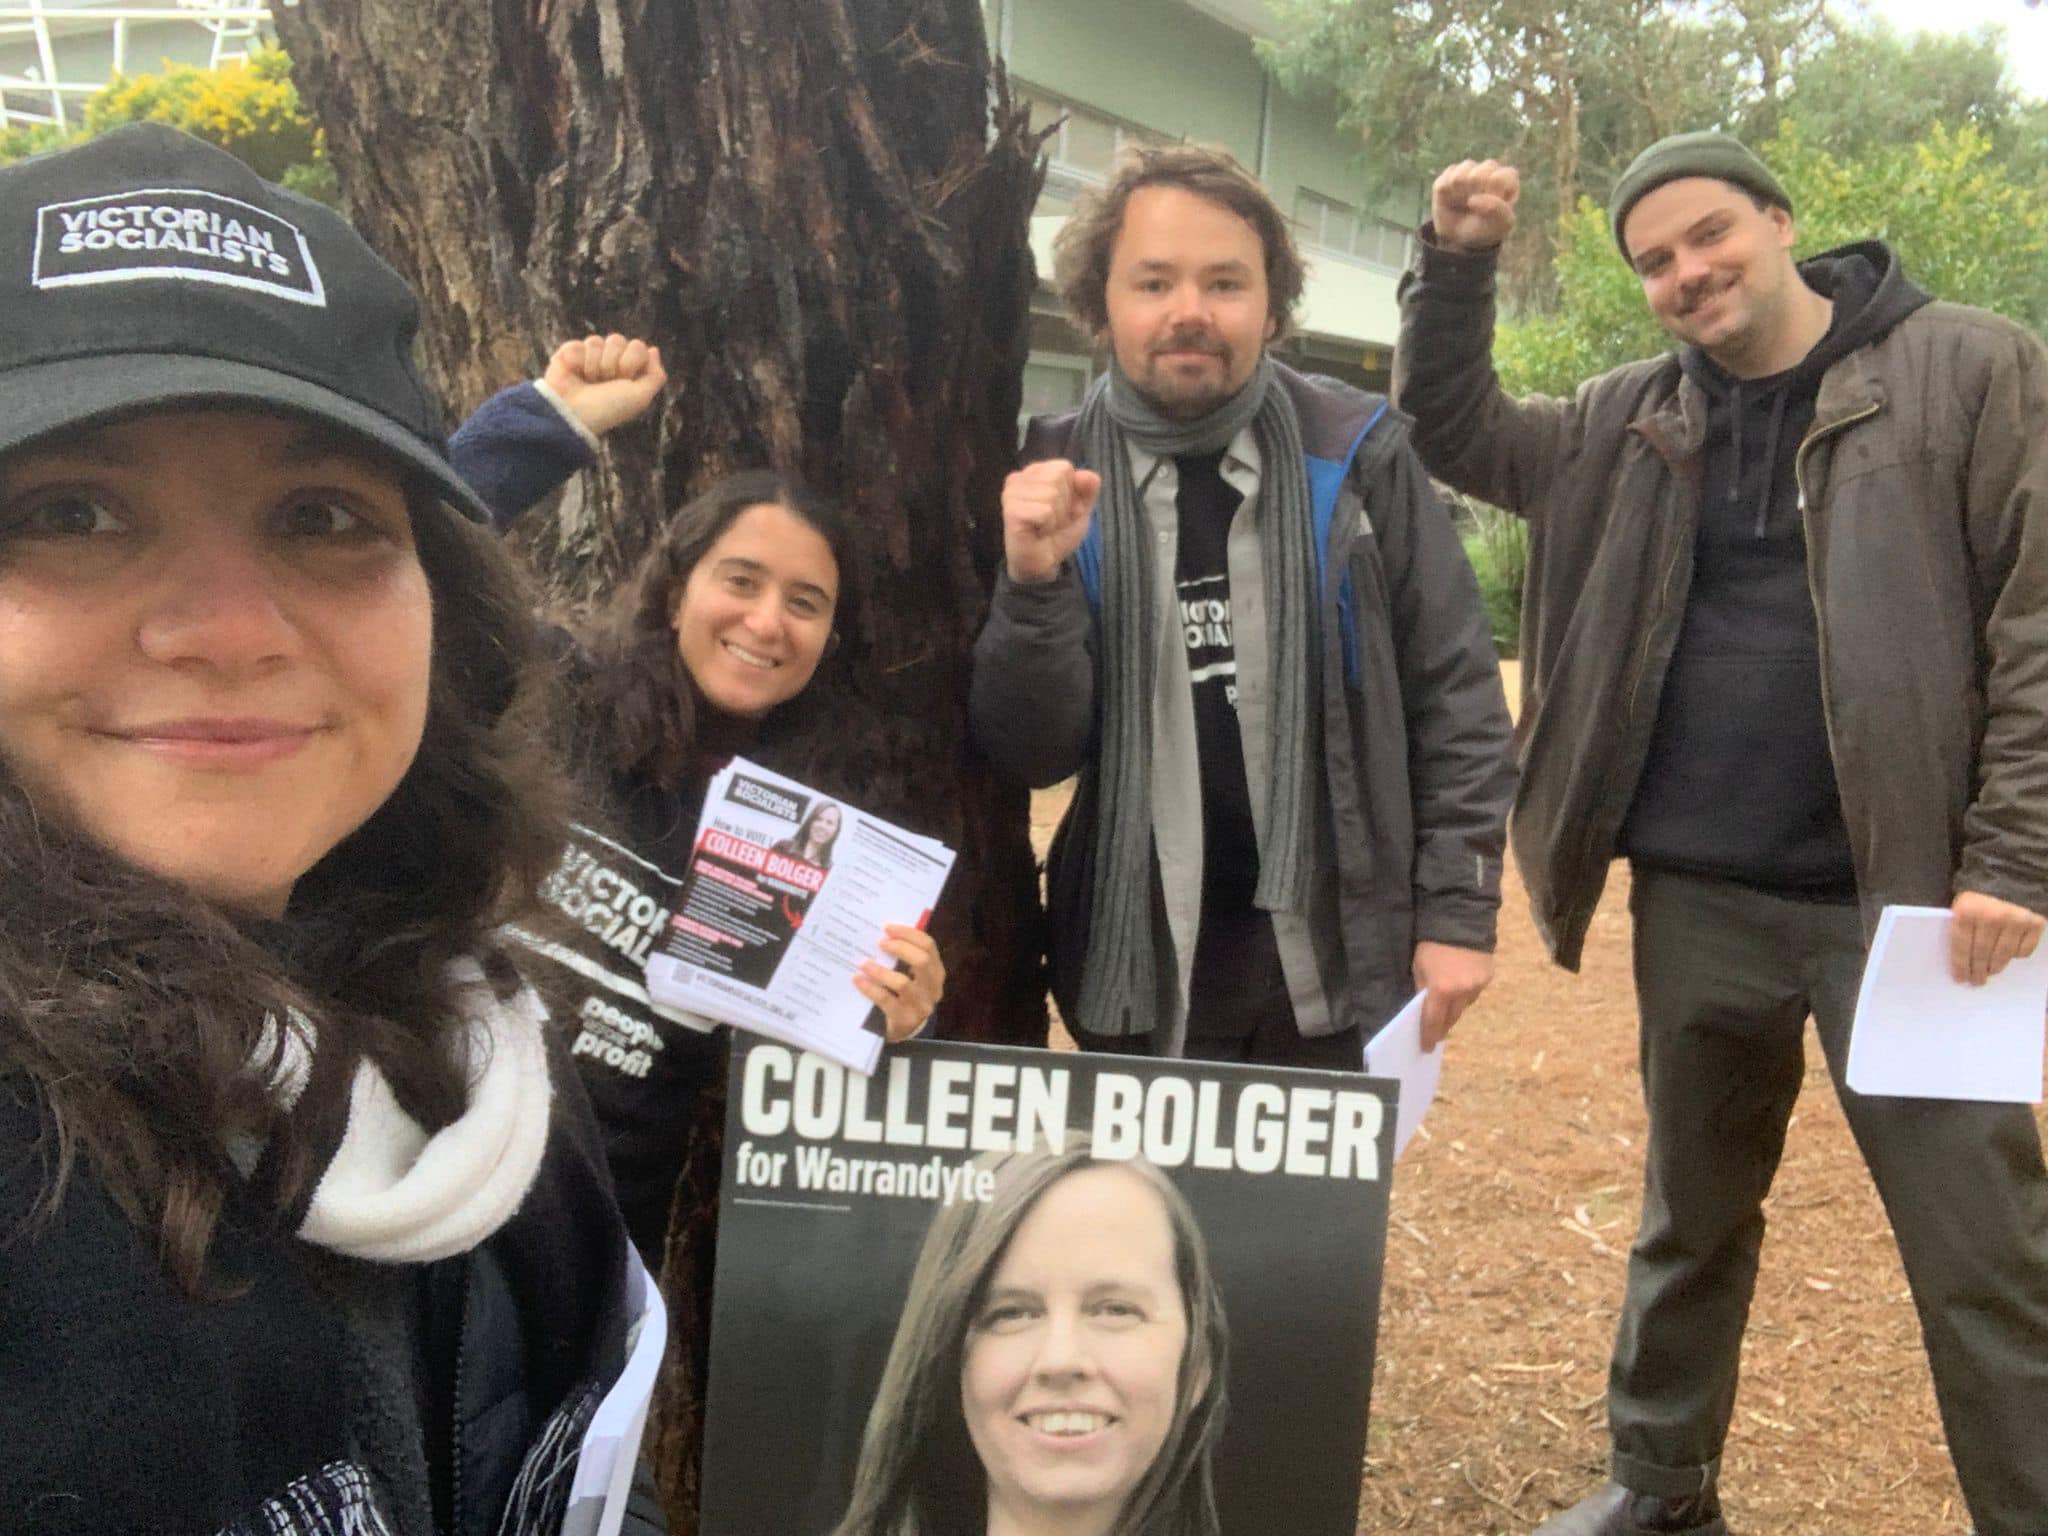 Victorian Socialists campaigners on election day in Warrandyte